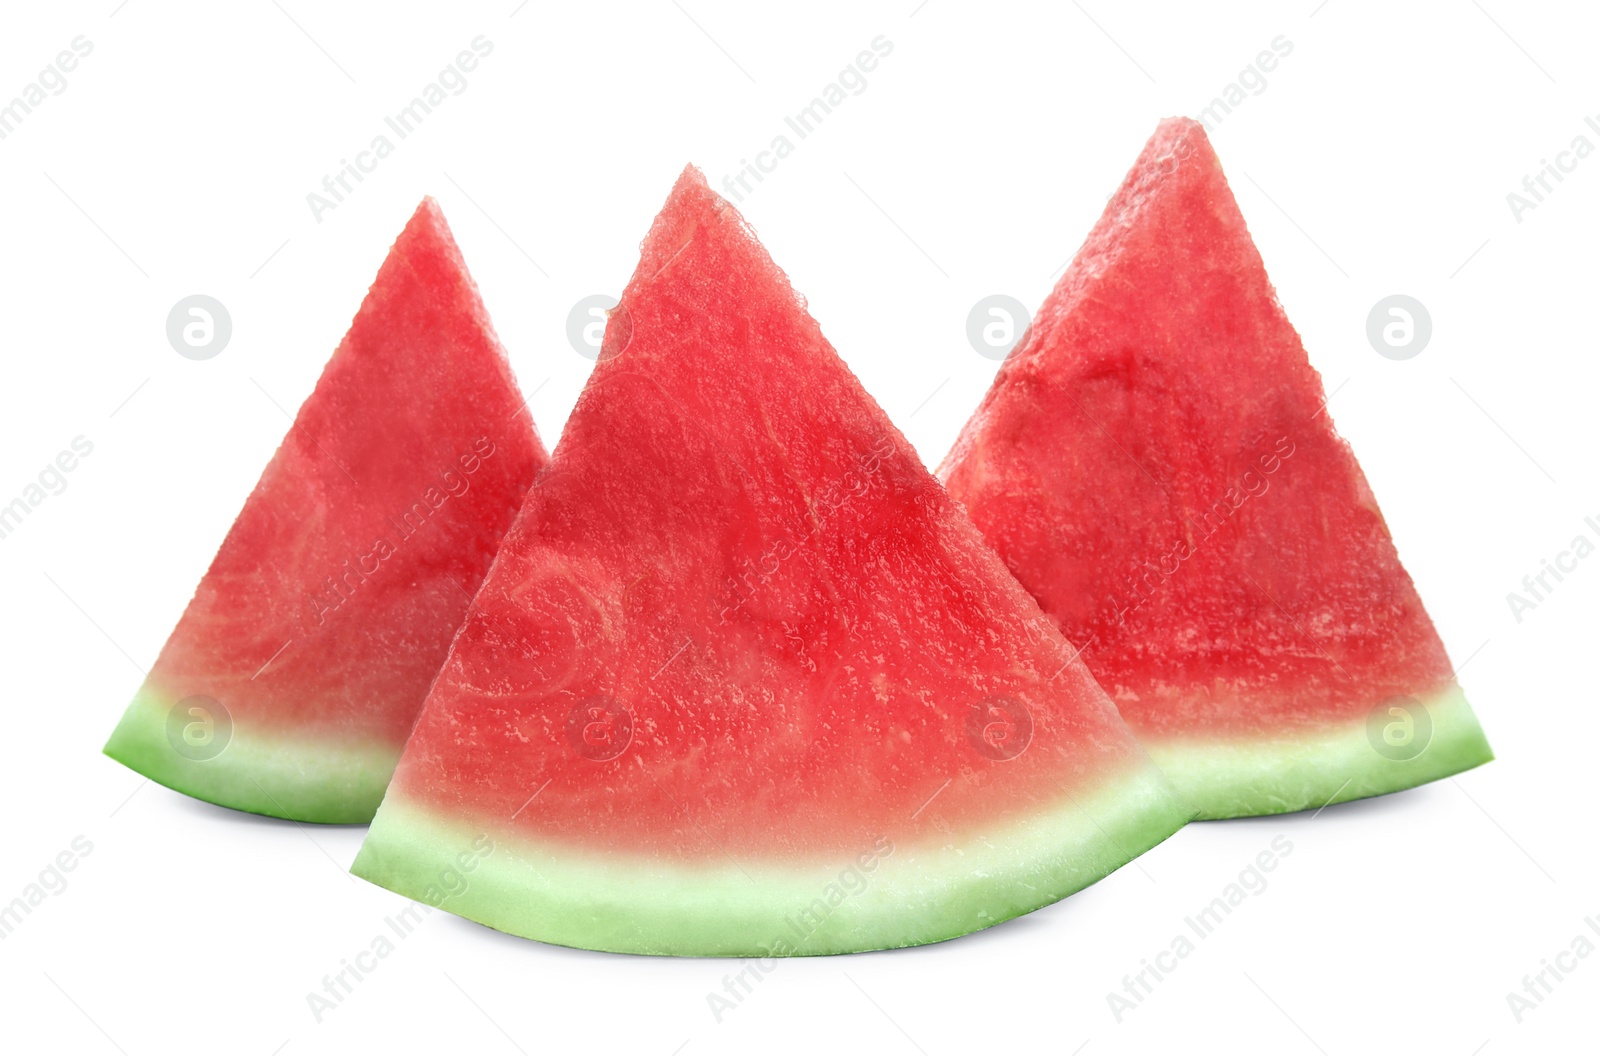 Image of Slices of delicious ripe seedless watermelon on white background 